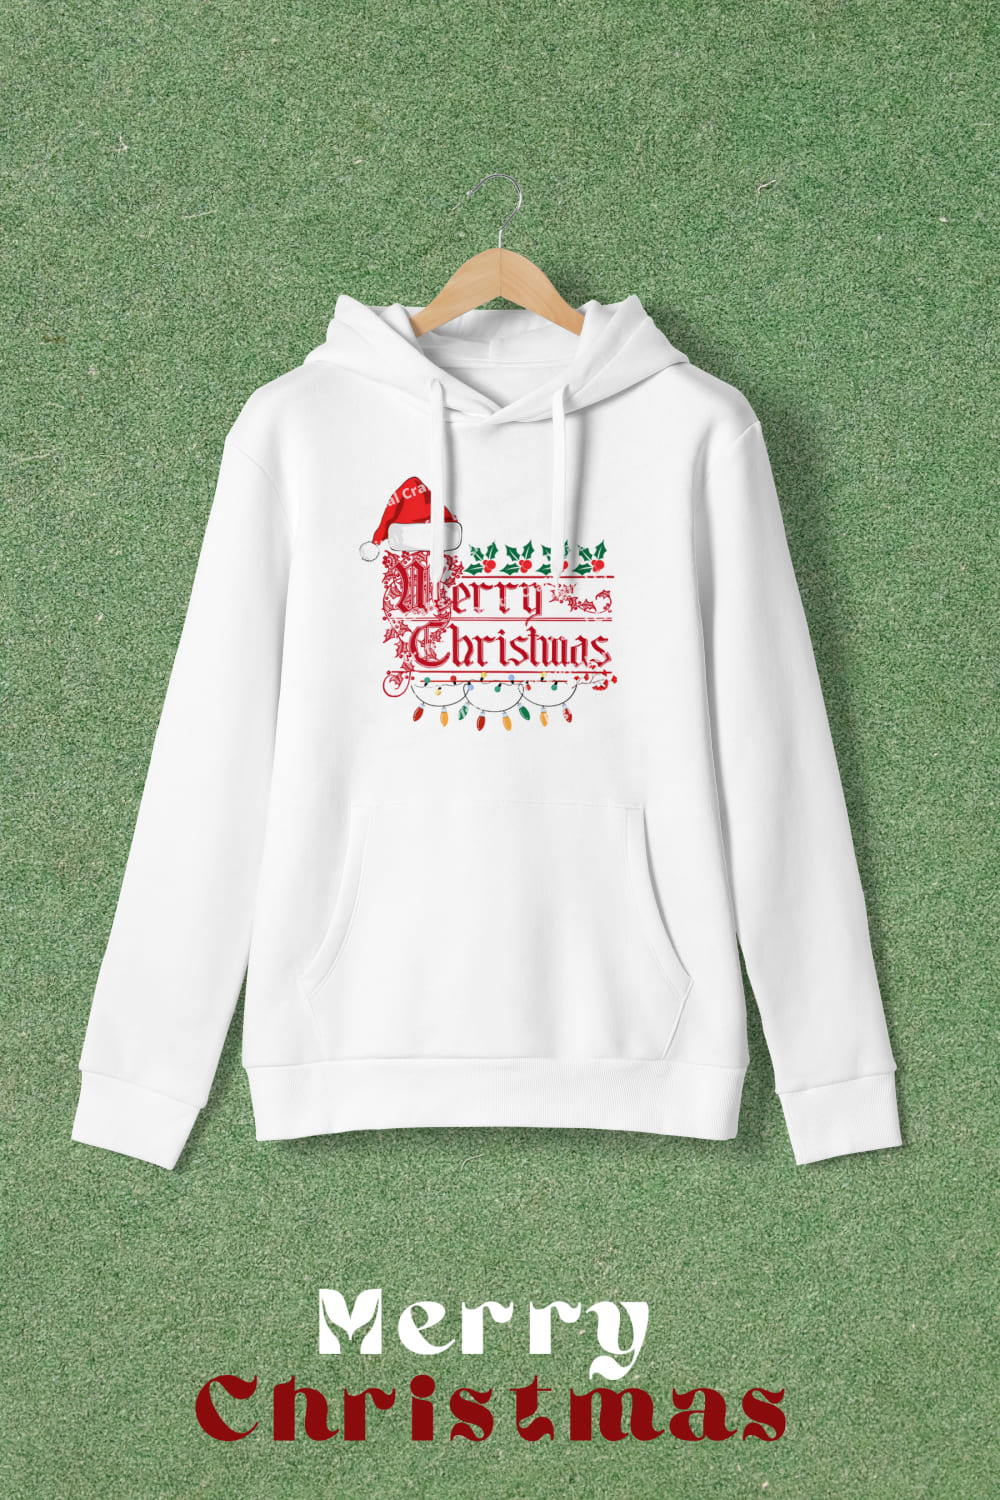 Image of hoodie with enchanting "Merry Christmas" slogan and Christmas accessories.